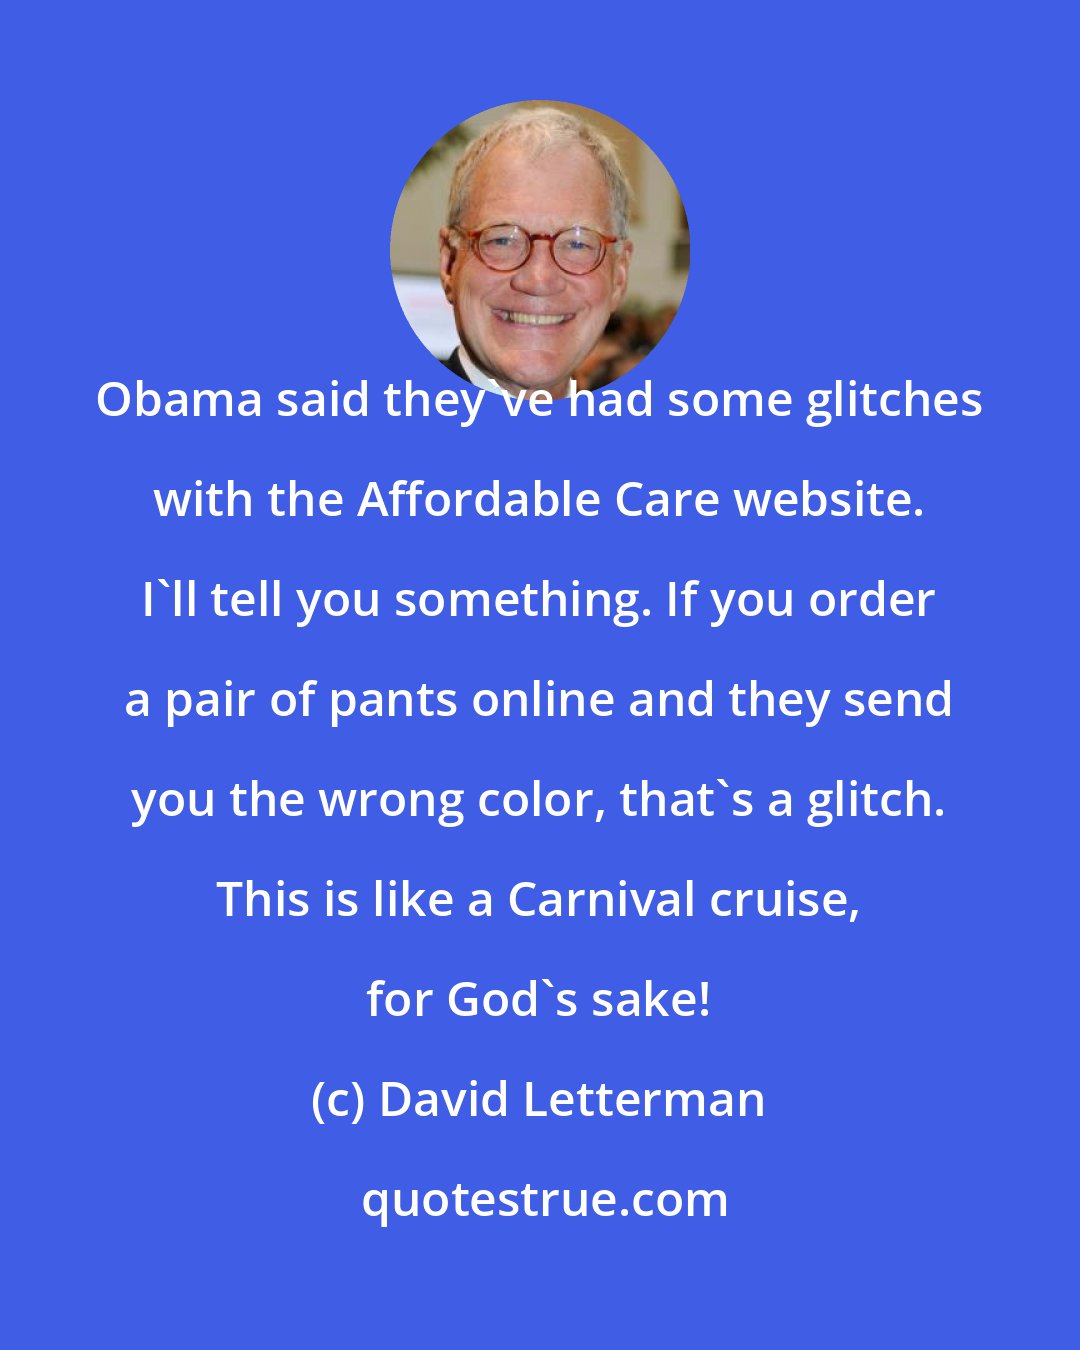 David Letterman: Obama said they've had some glitches with the Affordable Care website. I'll tell you something. If you order a pair of pants online and they send you the wrong color, that's a glitch. This is like a Carnival cruise, for God's sake!